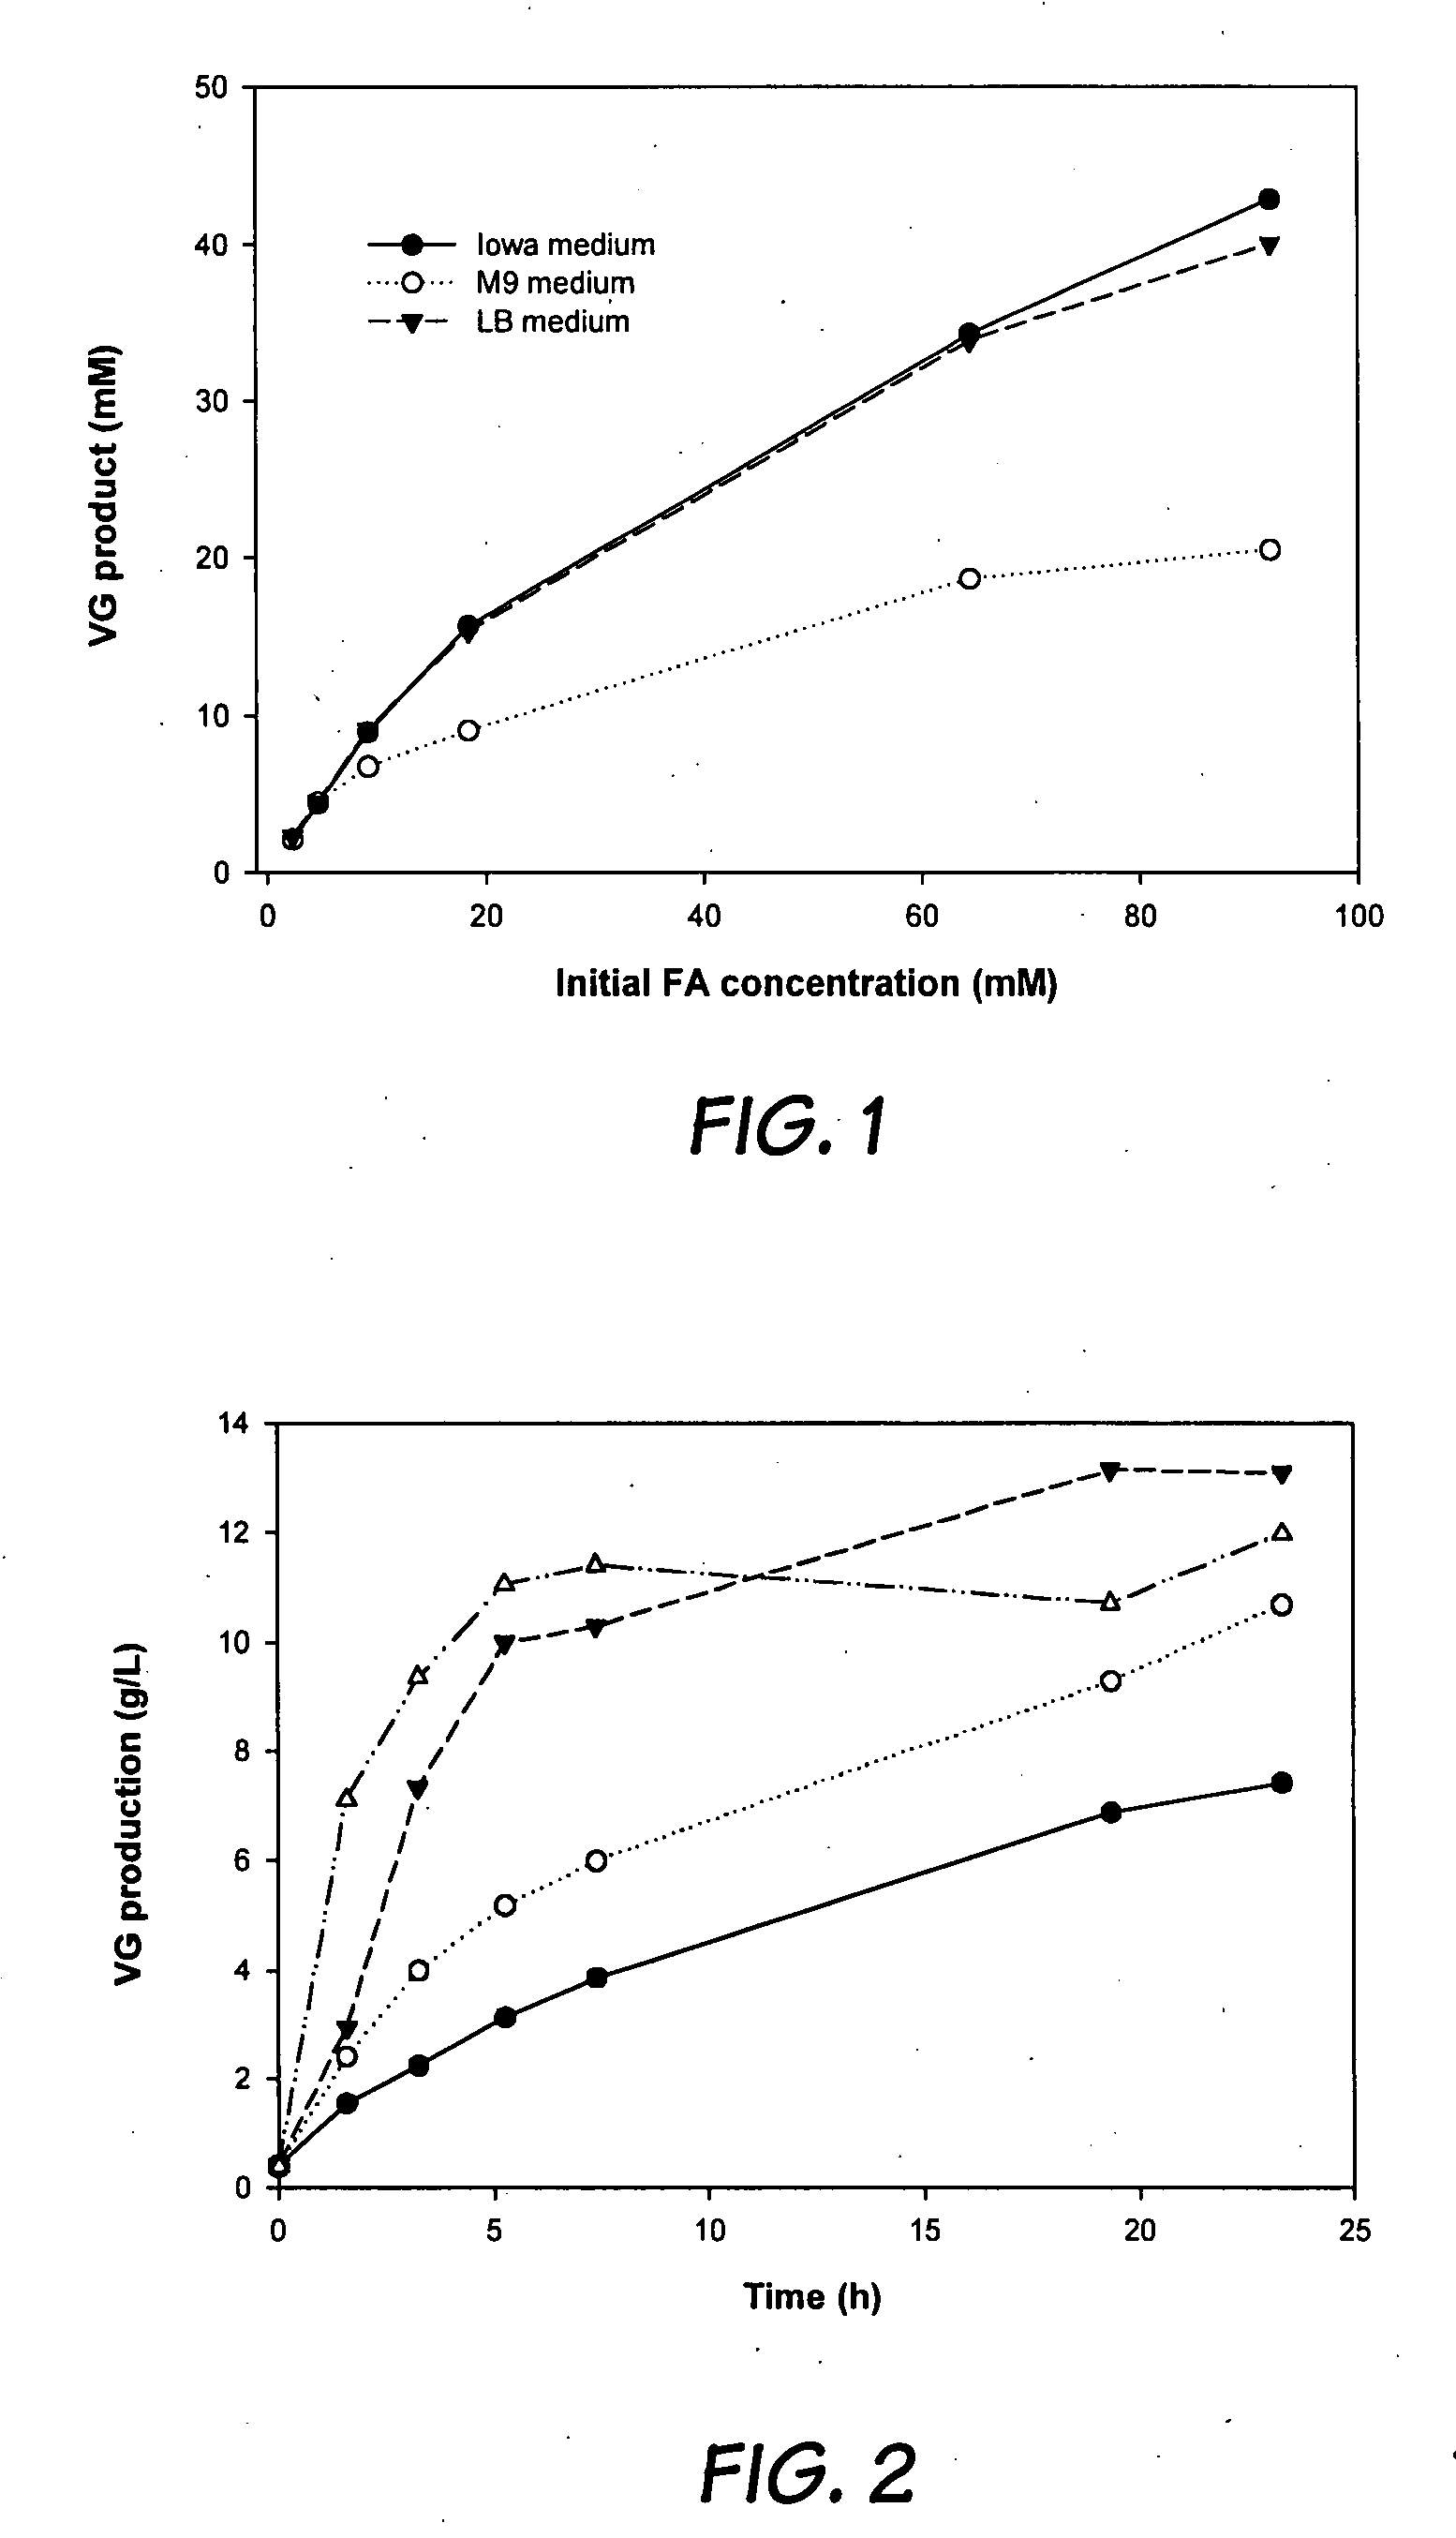 Process for producing 4-vinylguaiacol by biodecaroxylation of ferulic acid